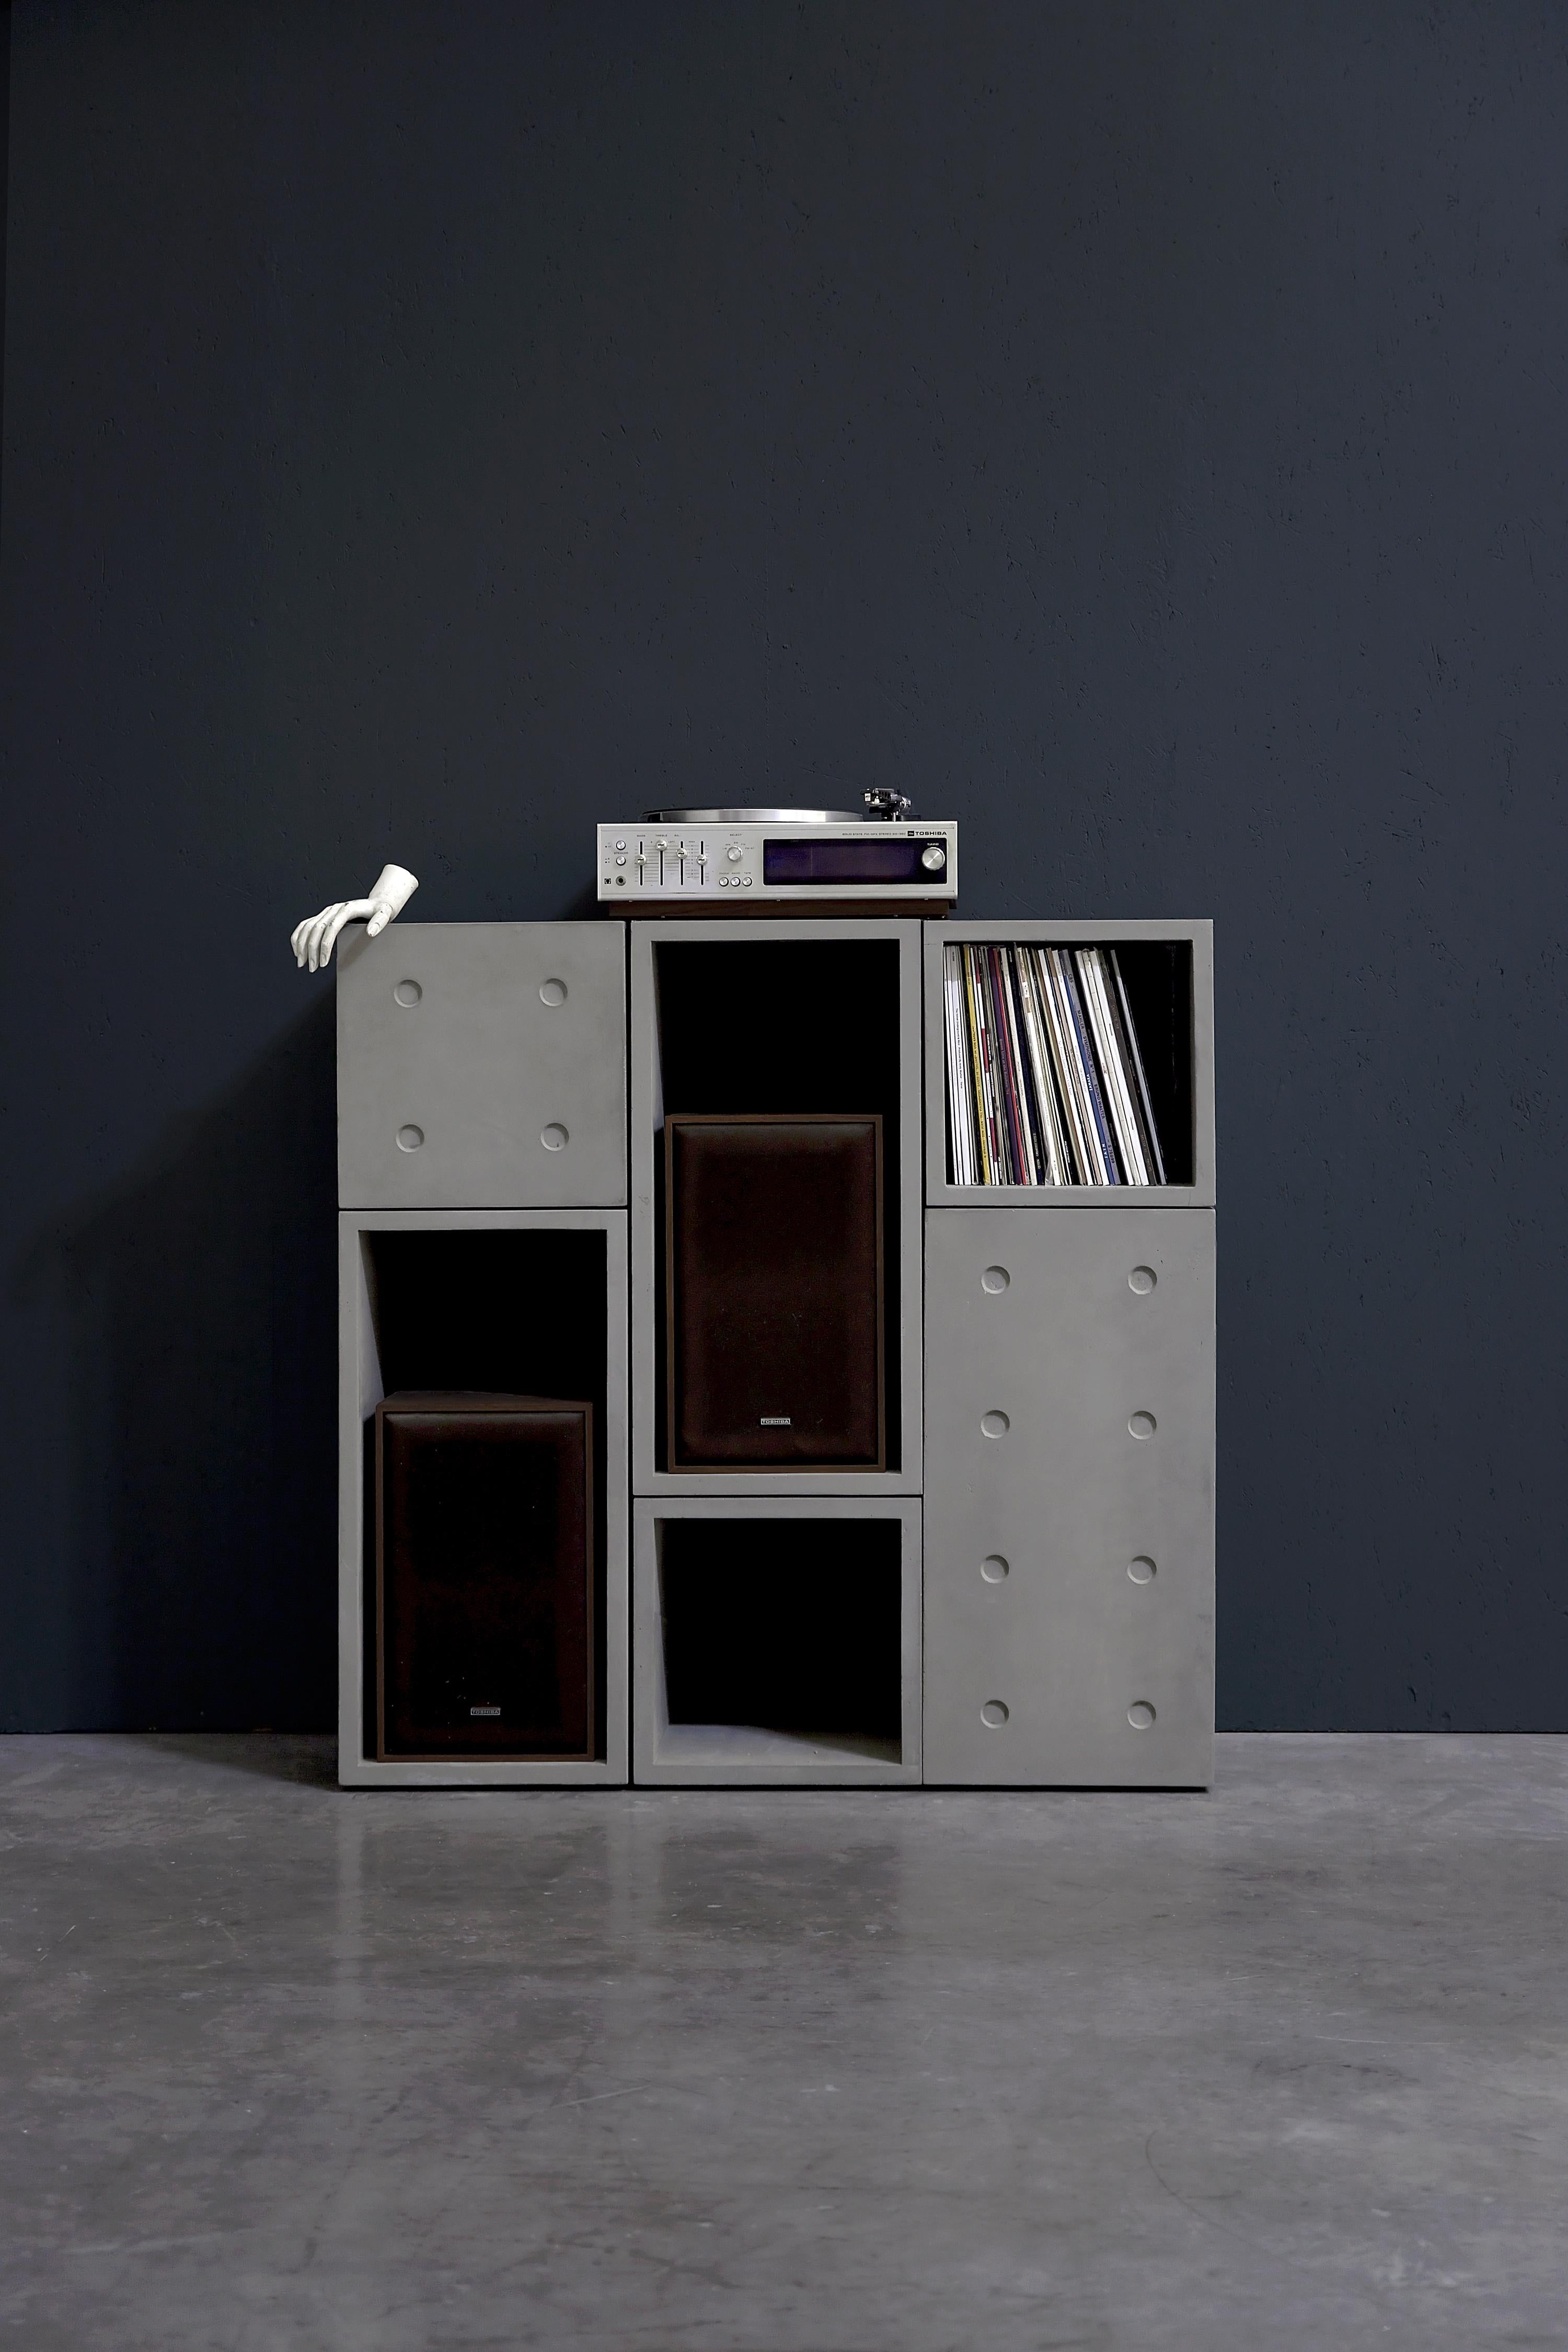 With 3 small and 3 large dice concrete cubes you can build serious furniture.
a hifi unit to place your record player and store a bunch of vynil records (about a hundred in each small cubes, 200 in the large one), a bookshelf for your kids, a